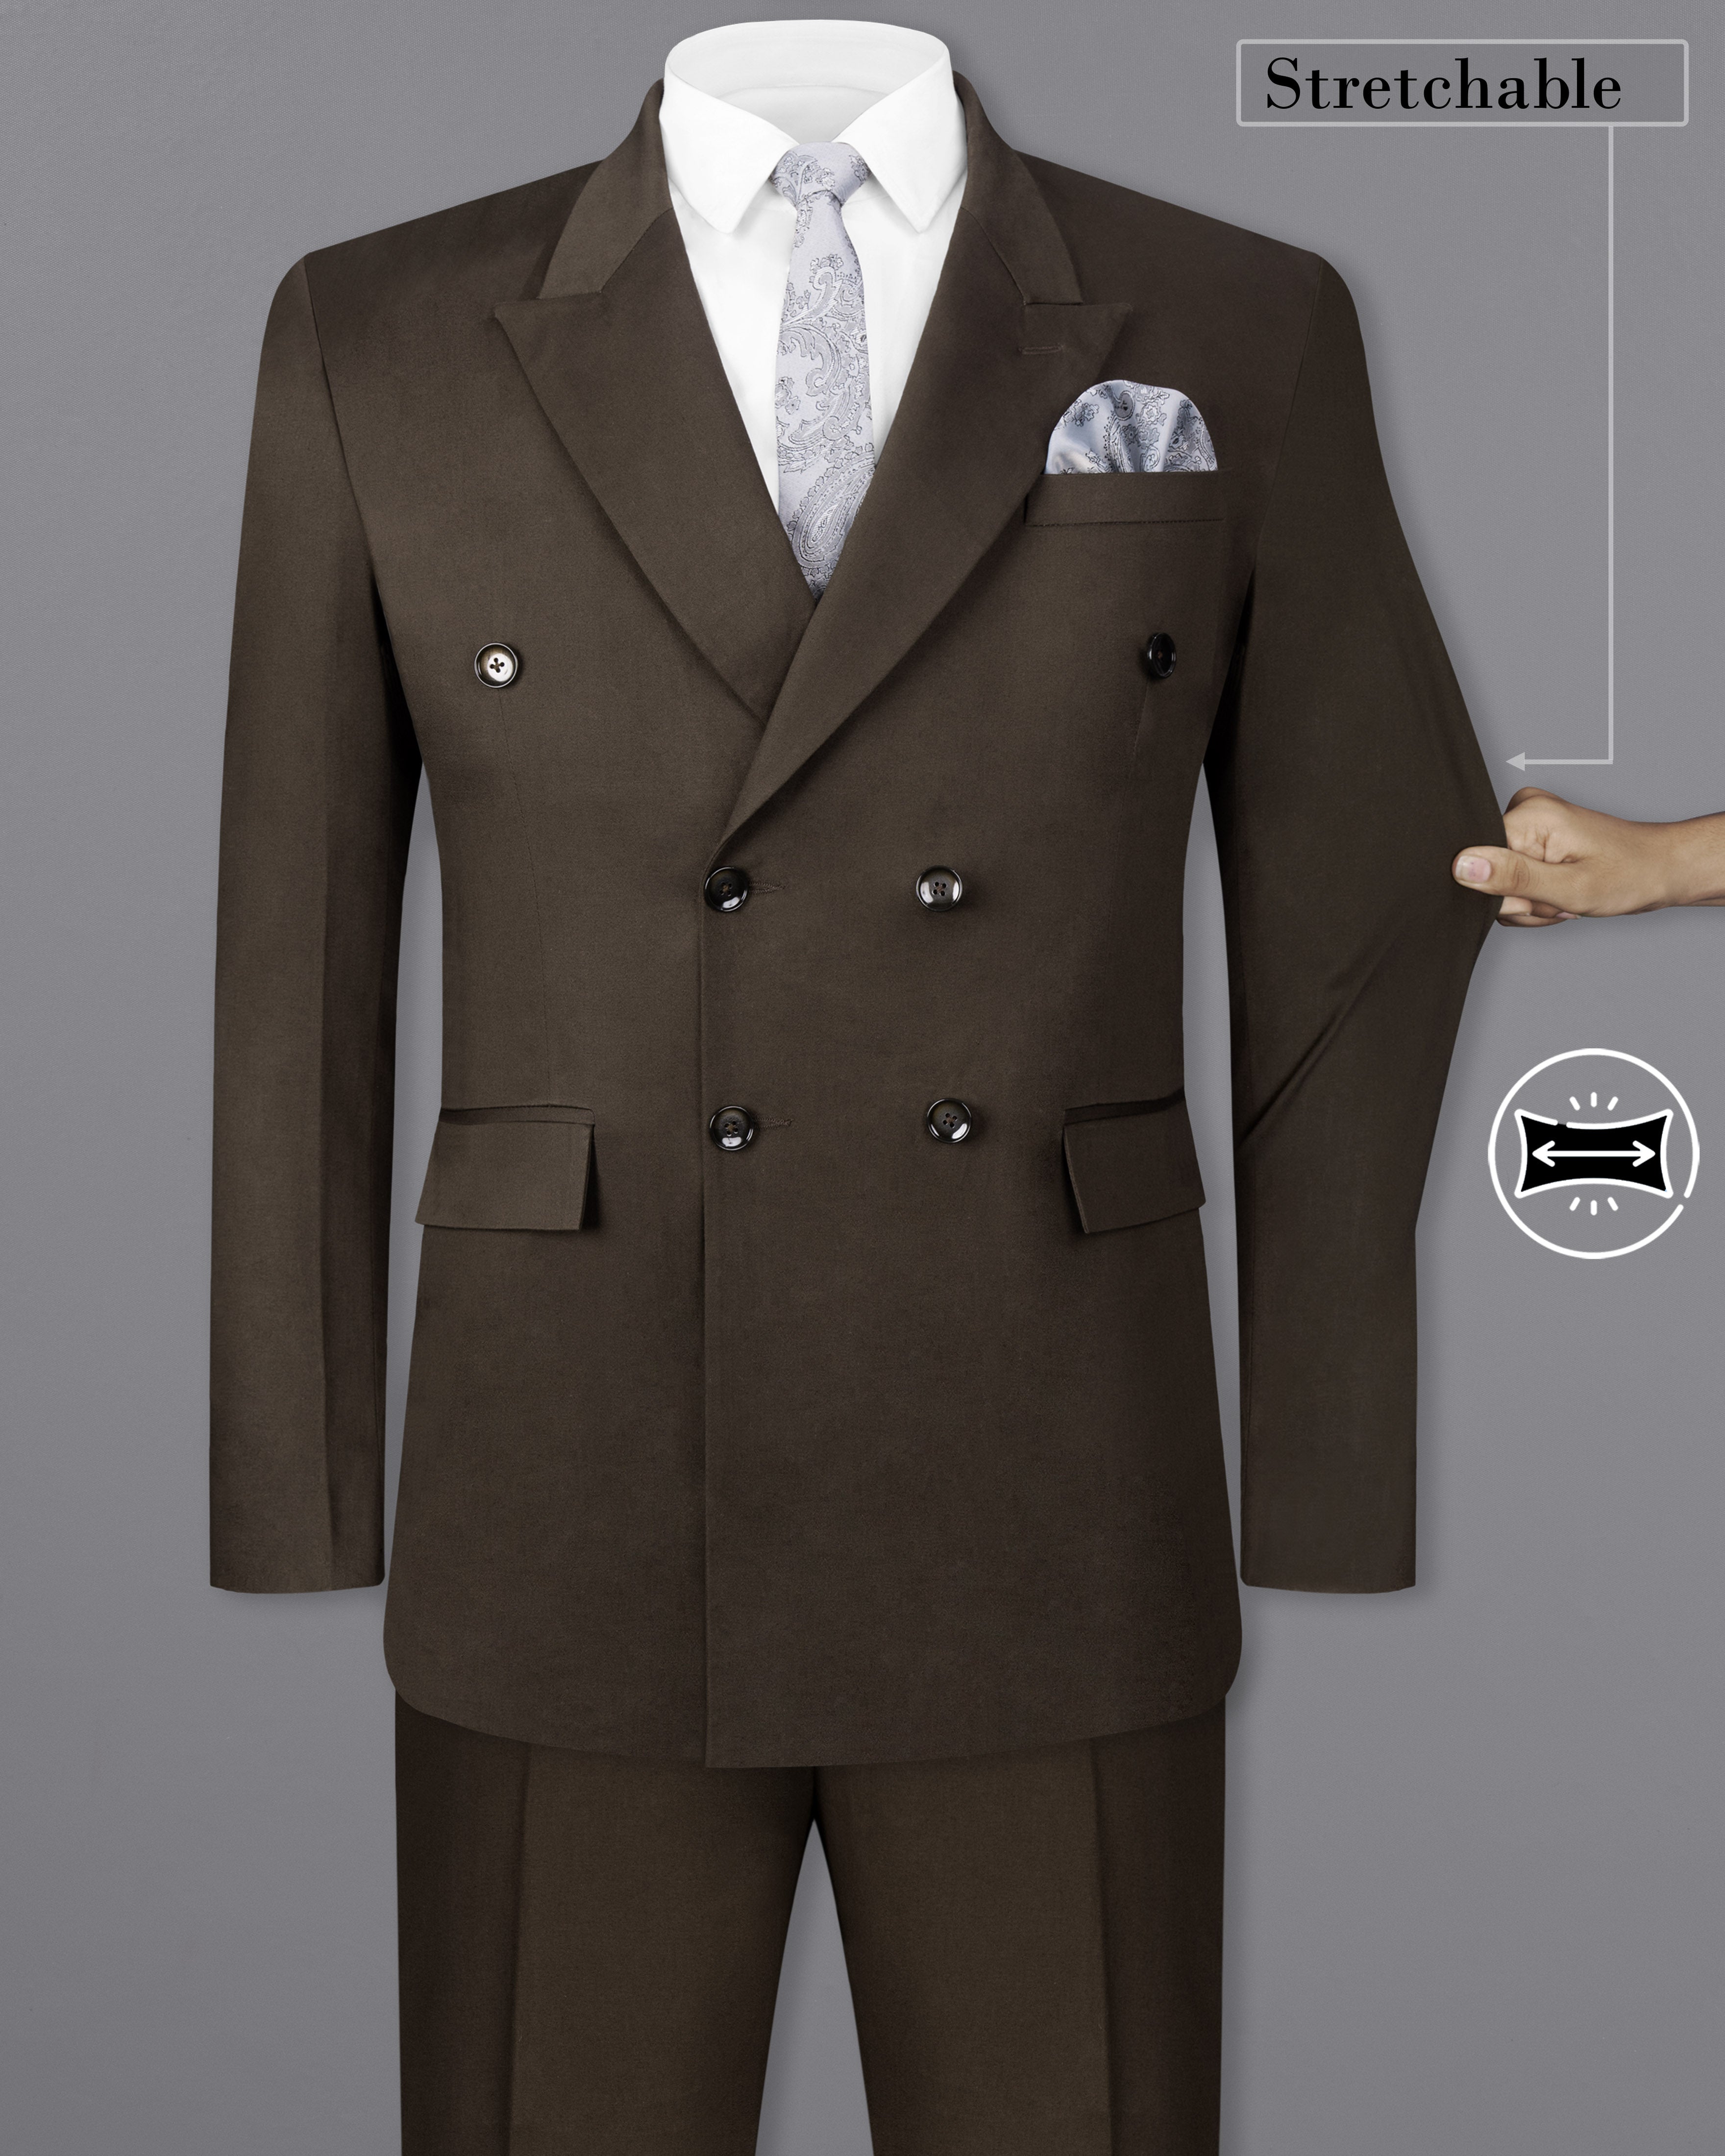 Walnut Brown Solid Stretchable Premium Cotton Double Breasted Traveler Suit ST2628-DB-36, ST2628-DB-38, ST2628-DB-40, ST2628-DB-42, ST2628-DB-44, ST2628-DB-46, ST2628-DB-48, ST2628-DB-50, ST2628-DB-52, ST2628-DB-54, ST2628-DB-56, ST2628-DB-58, ST2628-DB-60